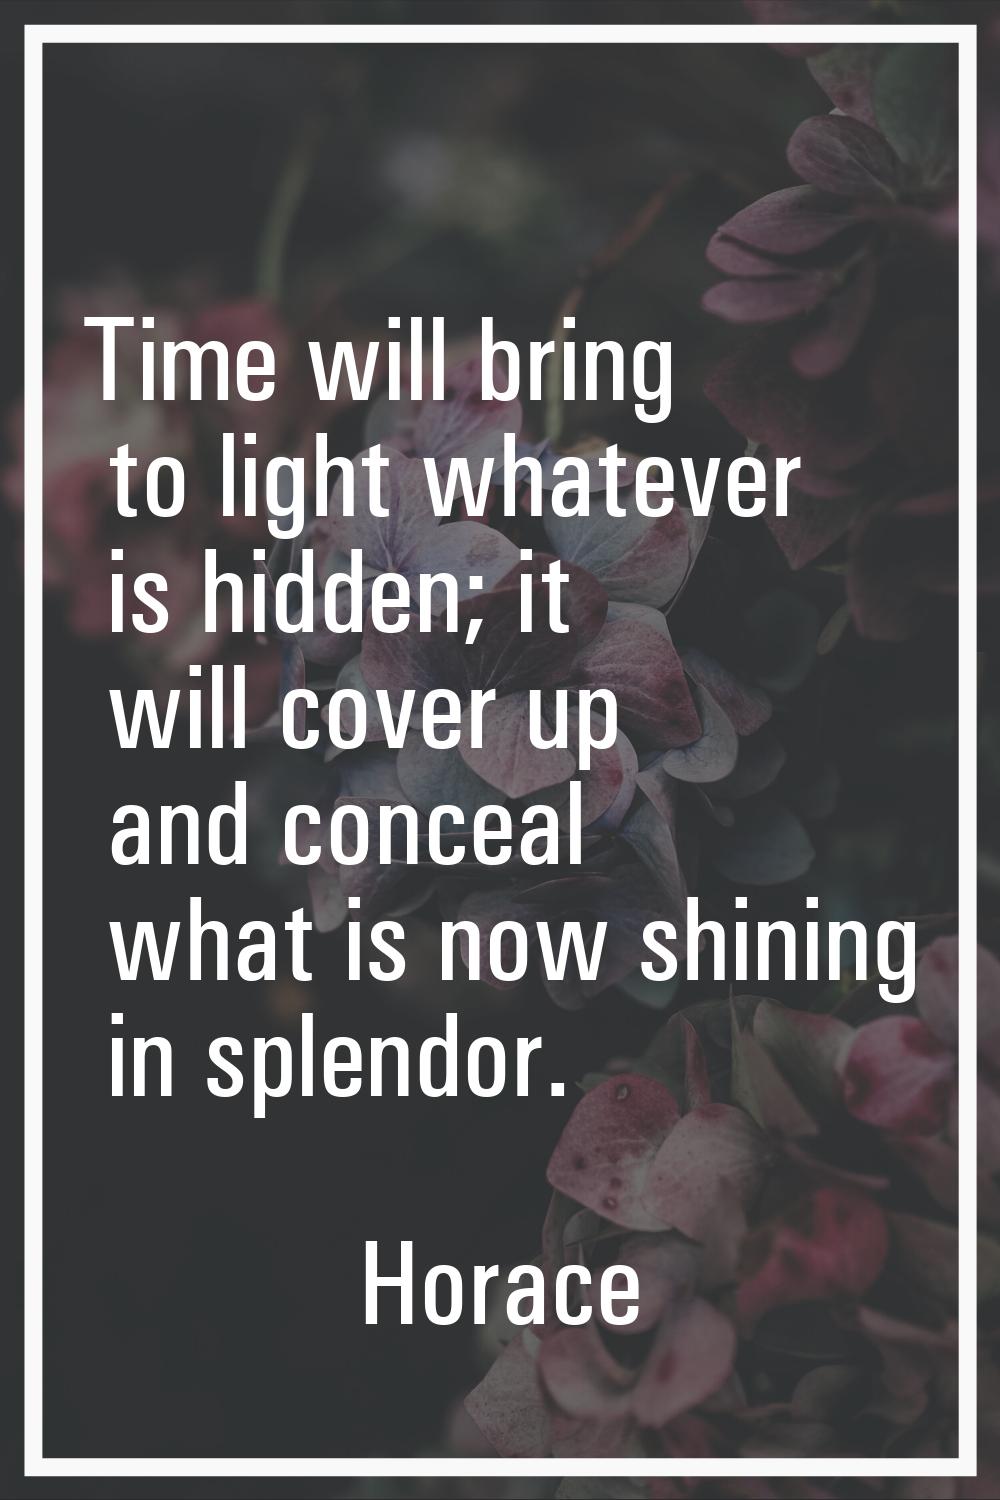 Time will bring to light whatever is hidden; it will cover up and conceal what is now shining in sp